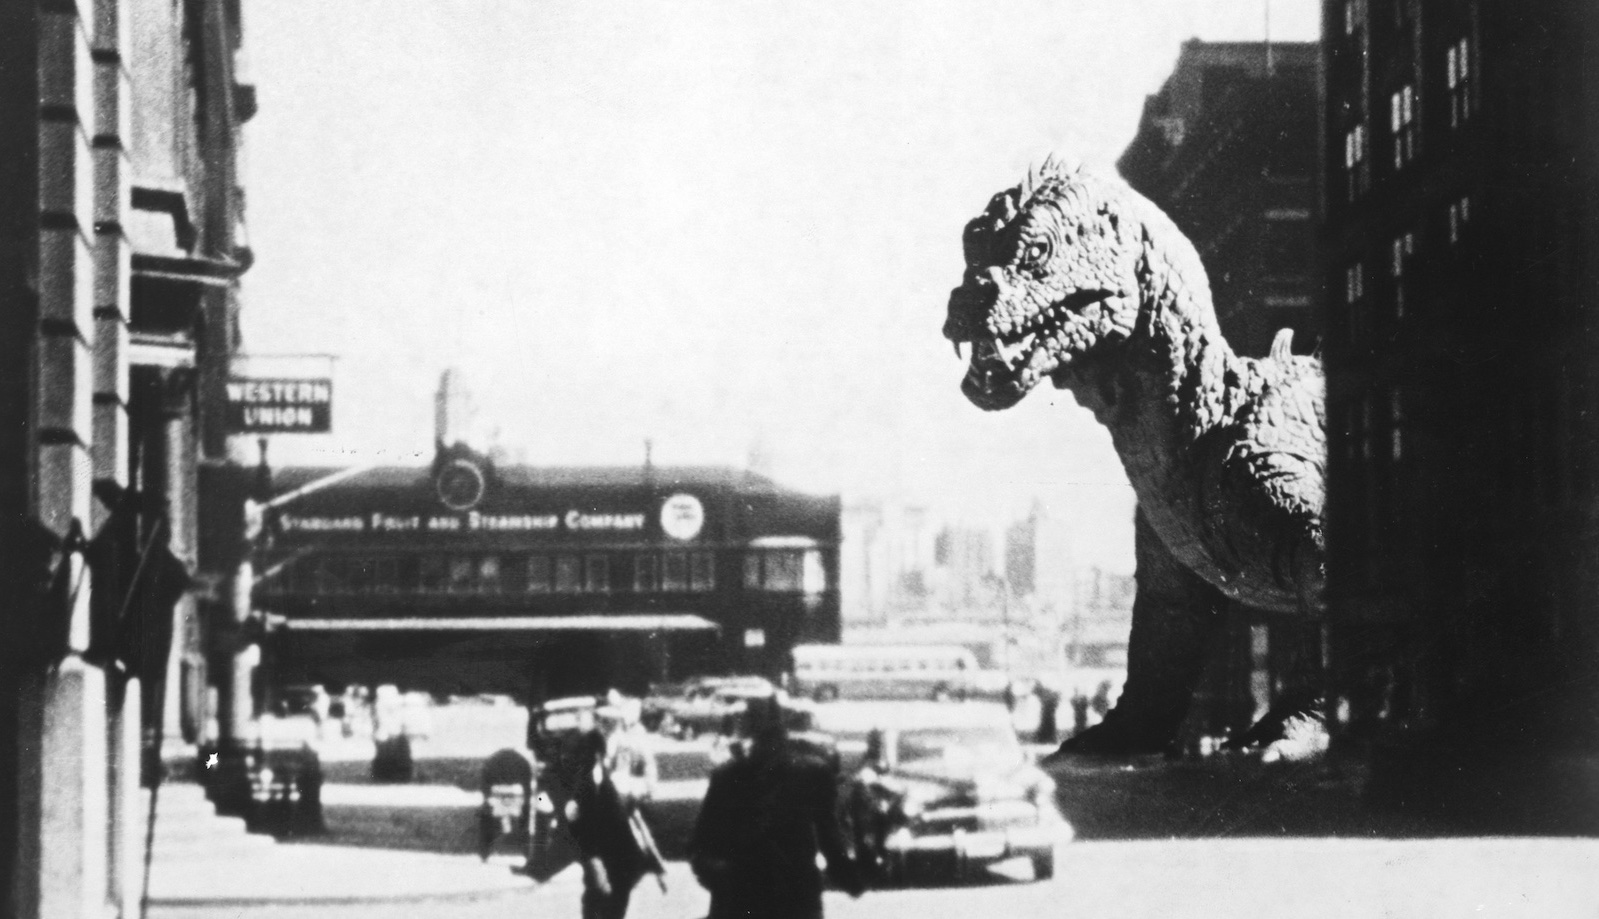 A black and white image of a gigantic dinosaur peeking out from the corner of a city street with people running in panic